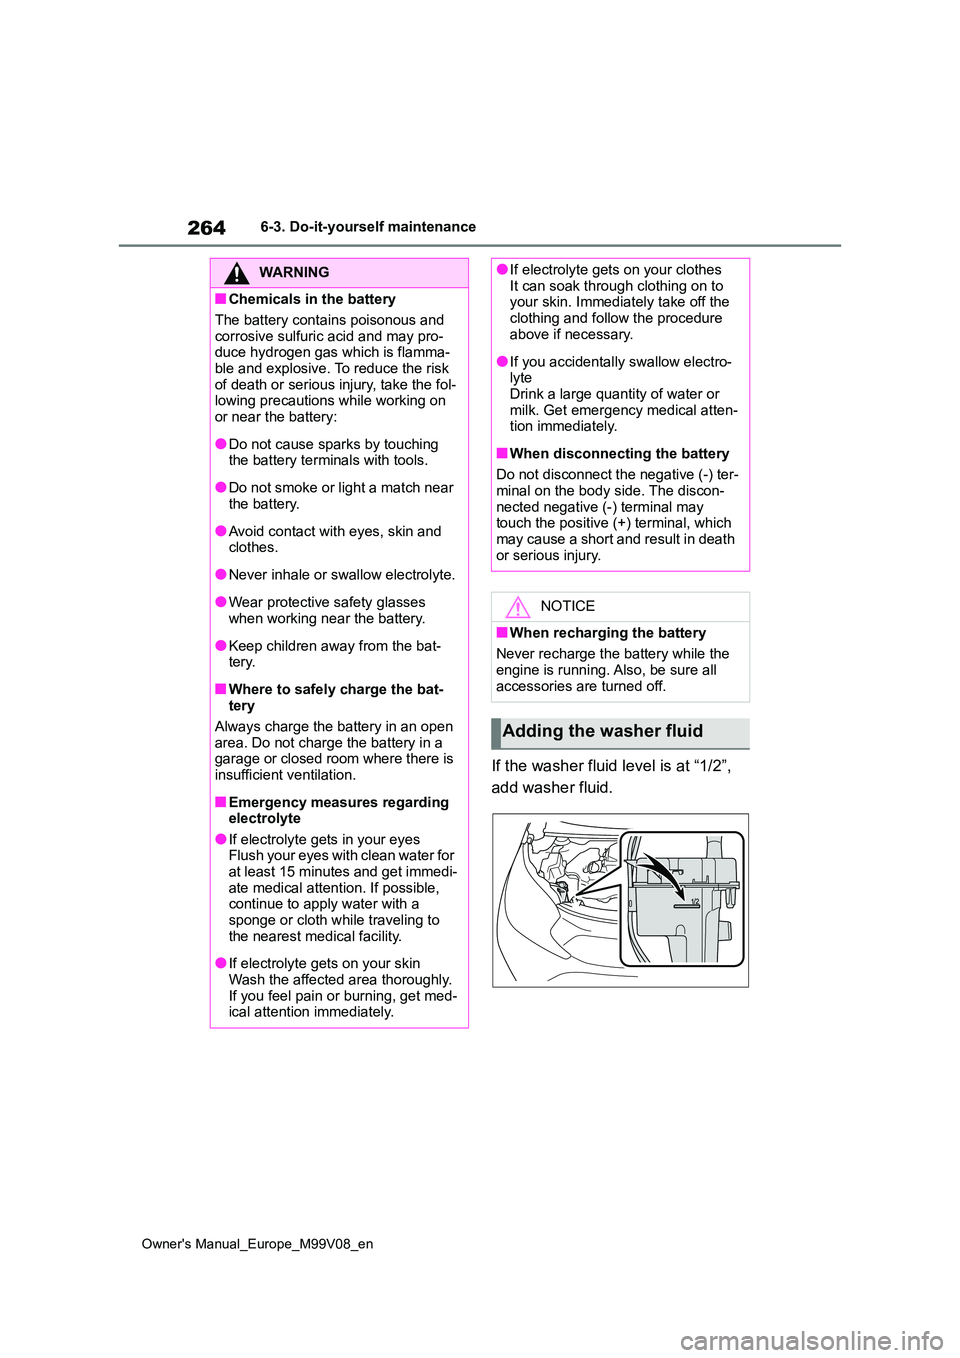 TOYOTA AYGO X 2022  Owners Manual (in English) 264
Owner's Manual_Europe_M99V08_en
6-3. Do-it-yourself maintenance
If the washer fluid level is at “1/2”,  
add washer fluid.
WARNING
■Chemicals in the battery 
The battery contains poisono